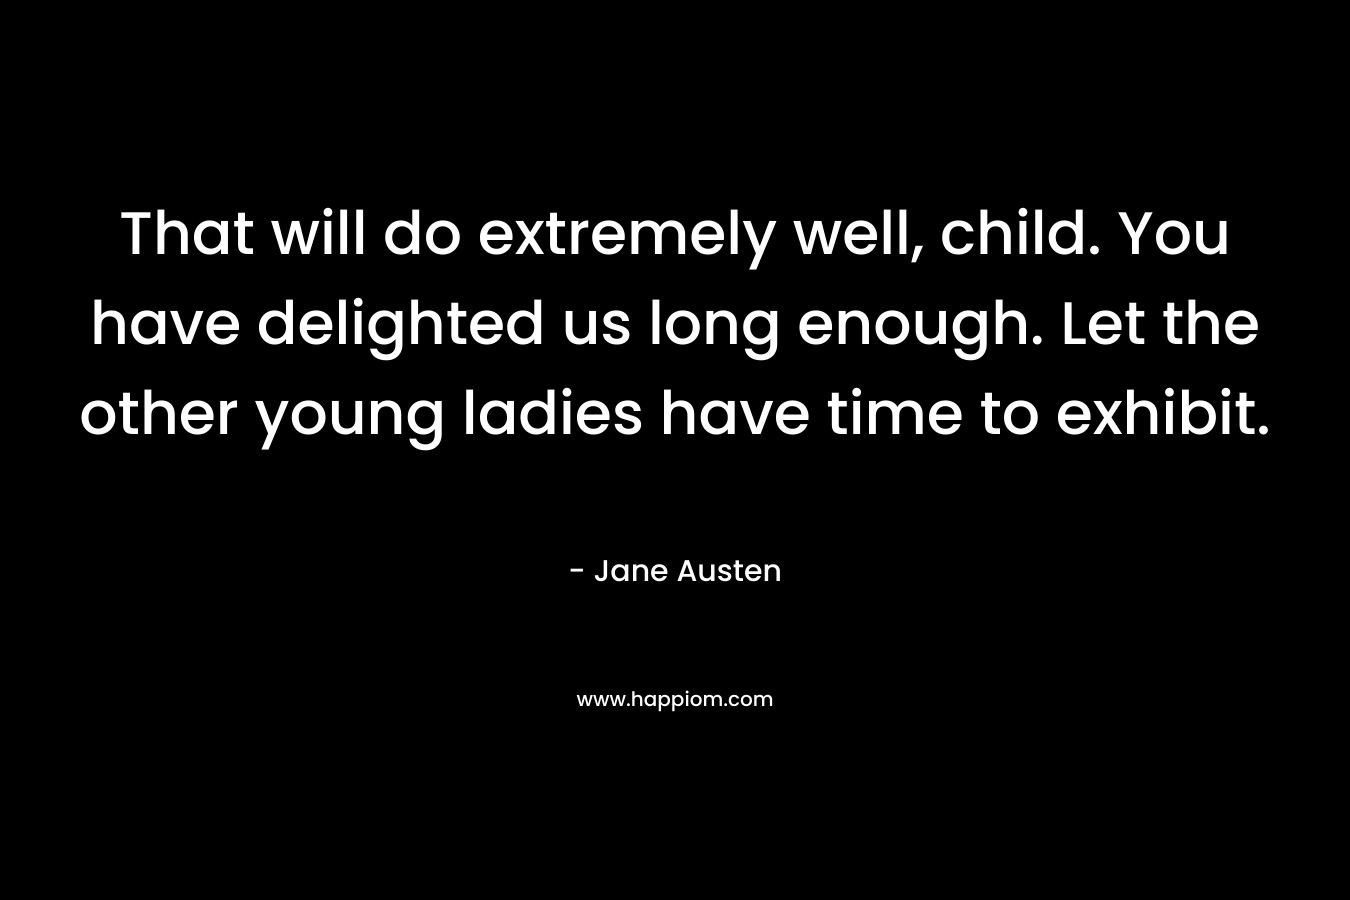 That will do extremely well, child. You have delighted us long enough. Let the other young ladies have time to exhibit. – Jane Austen